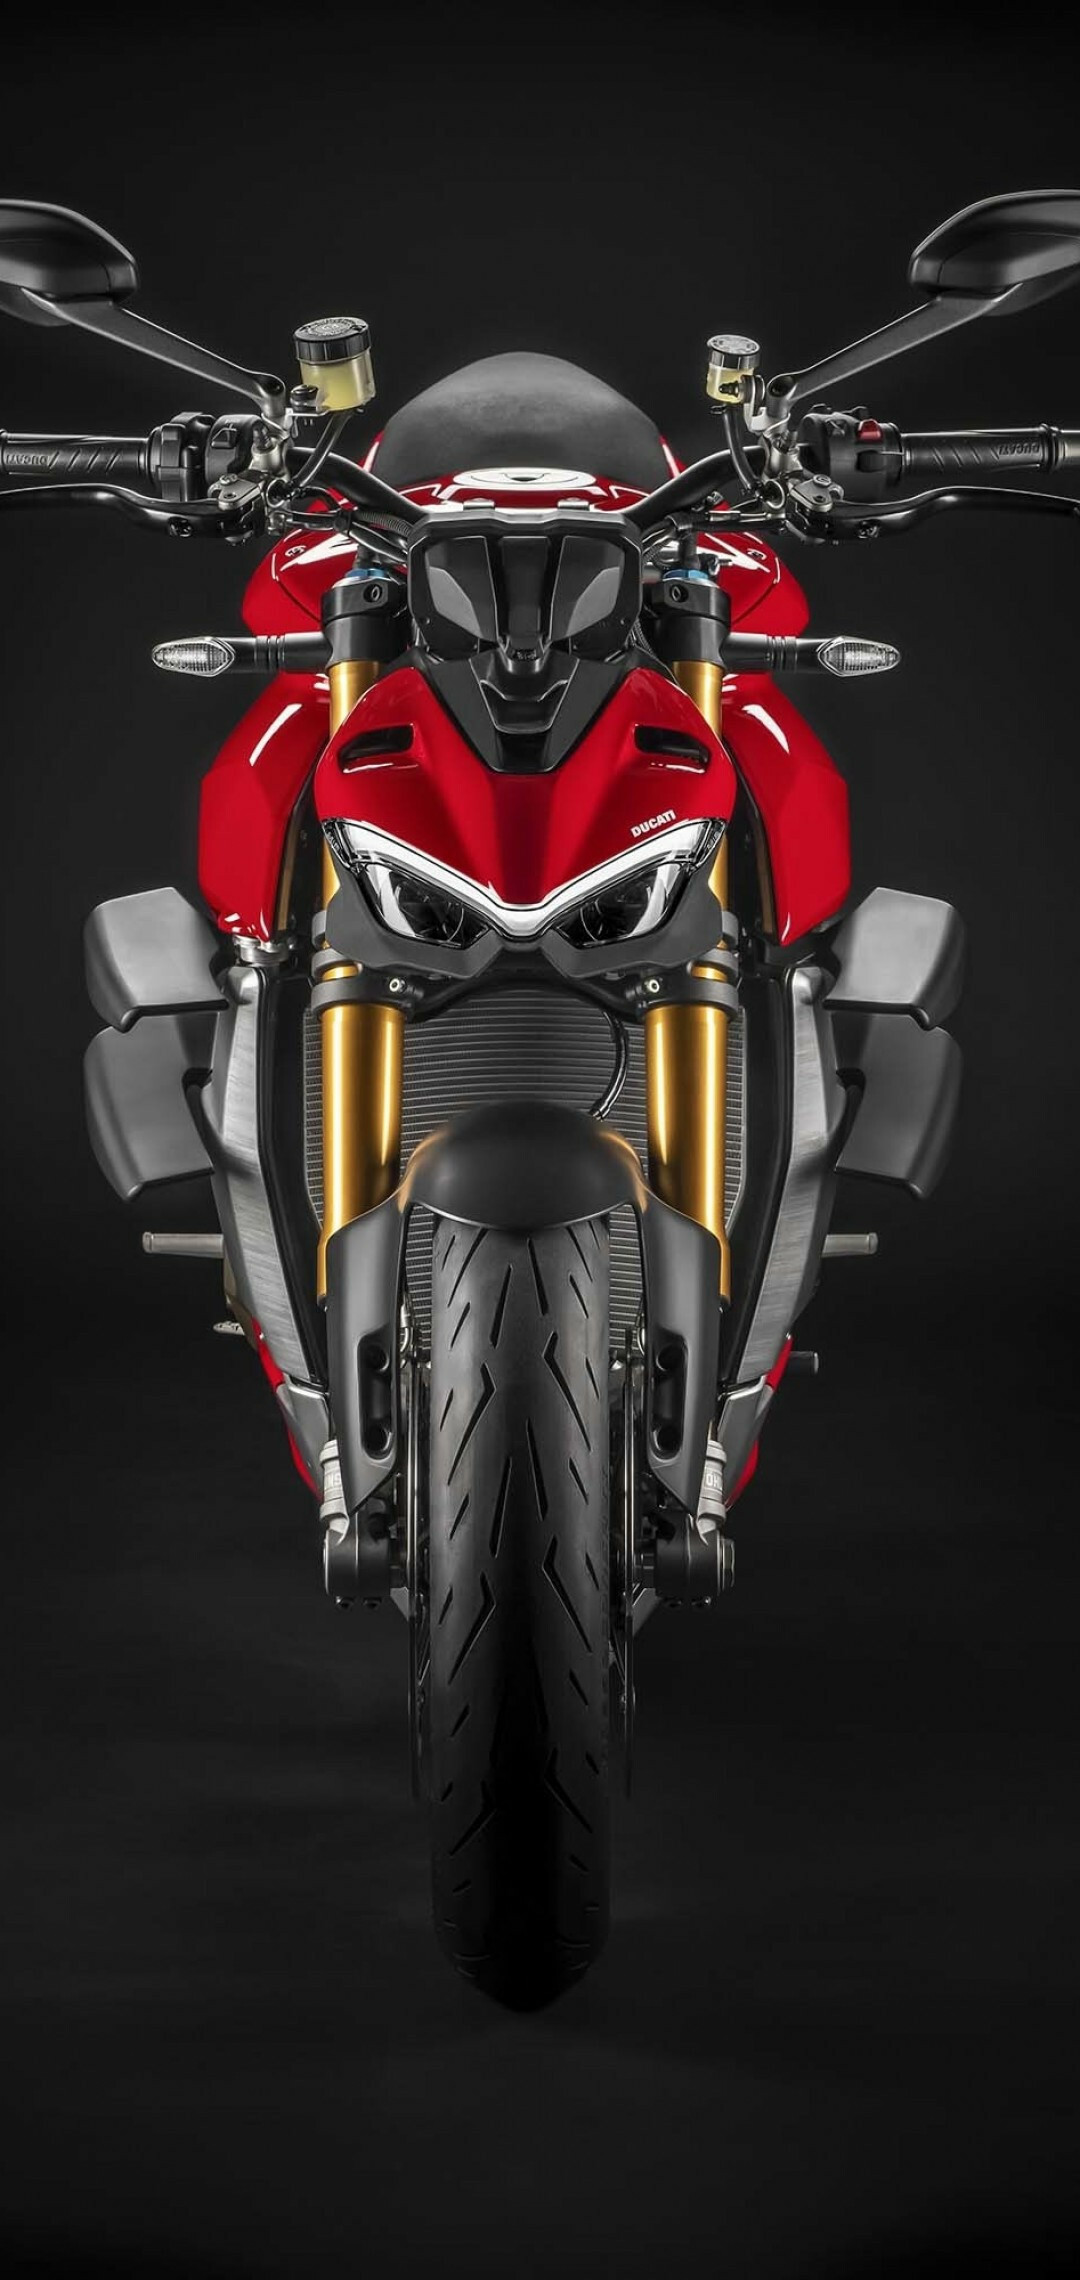 Ducati: Streetfighter V4, A streetfighter motorcycle produced by the Italian company. 1080x2280 HD Background.